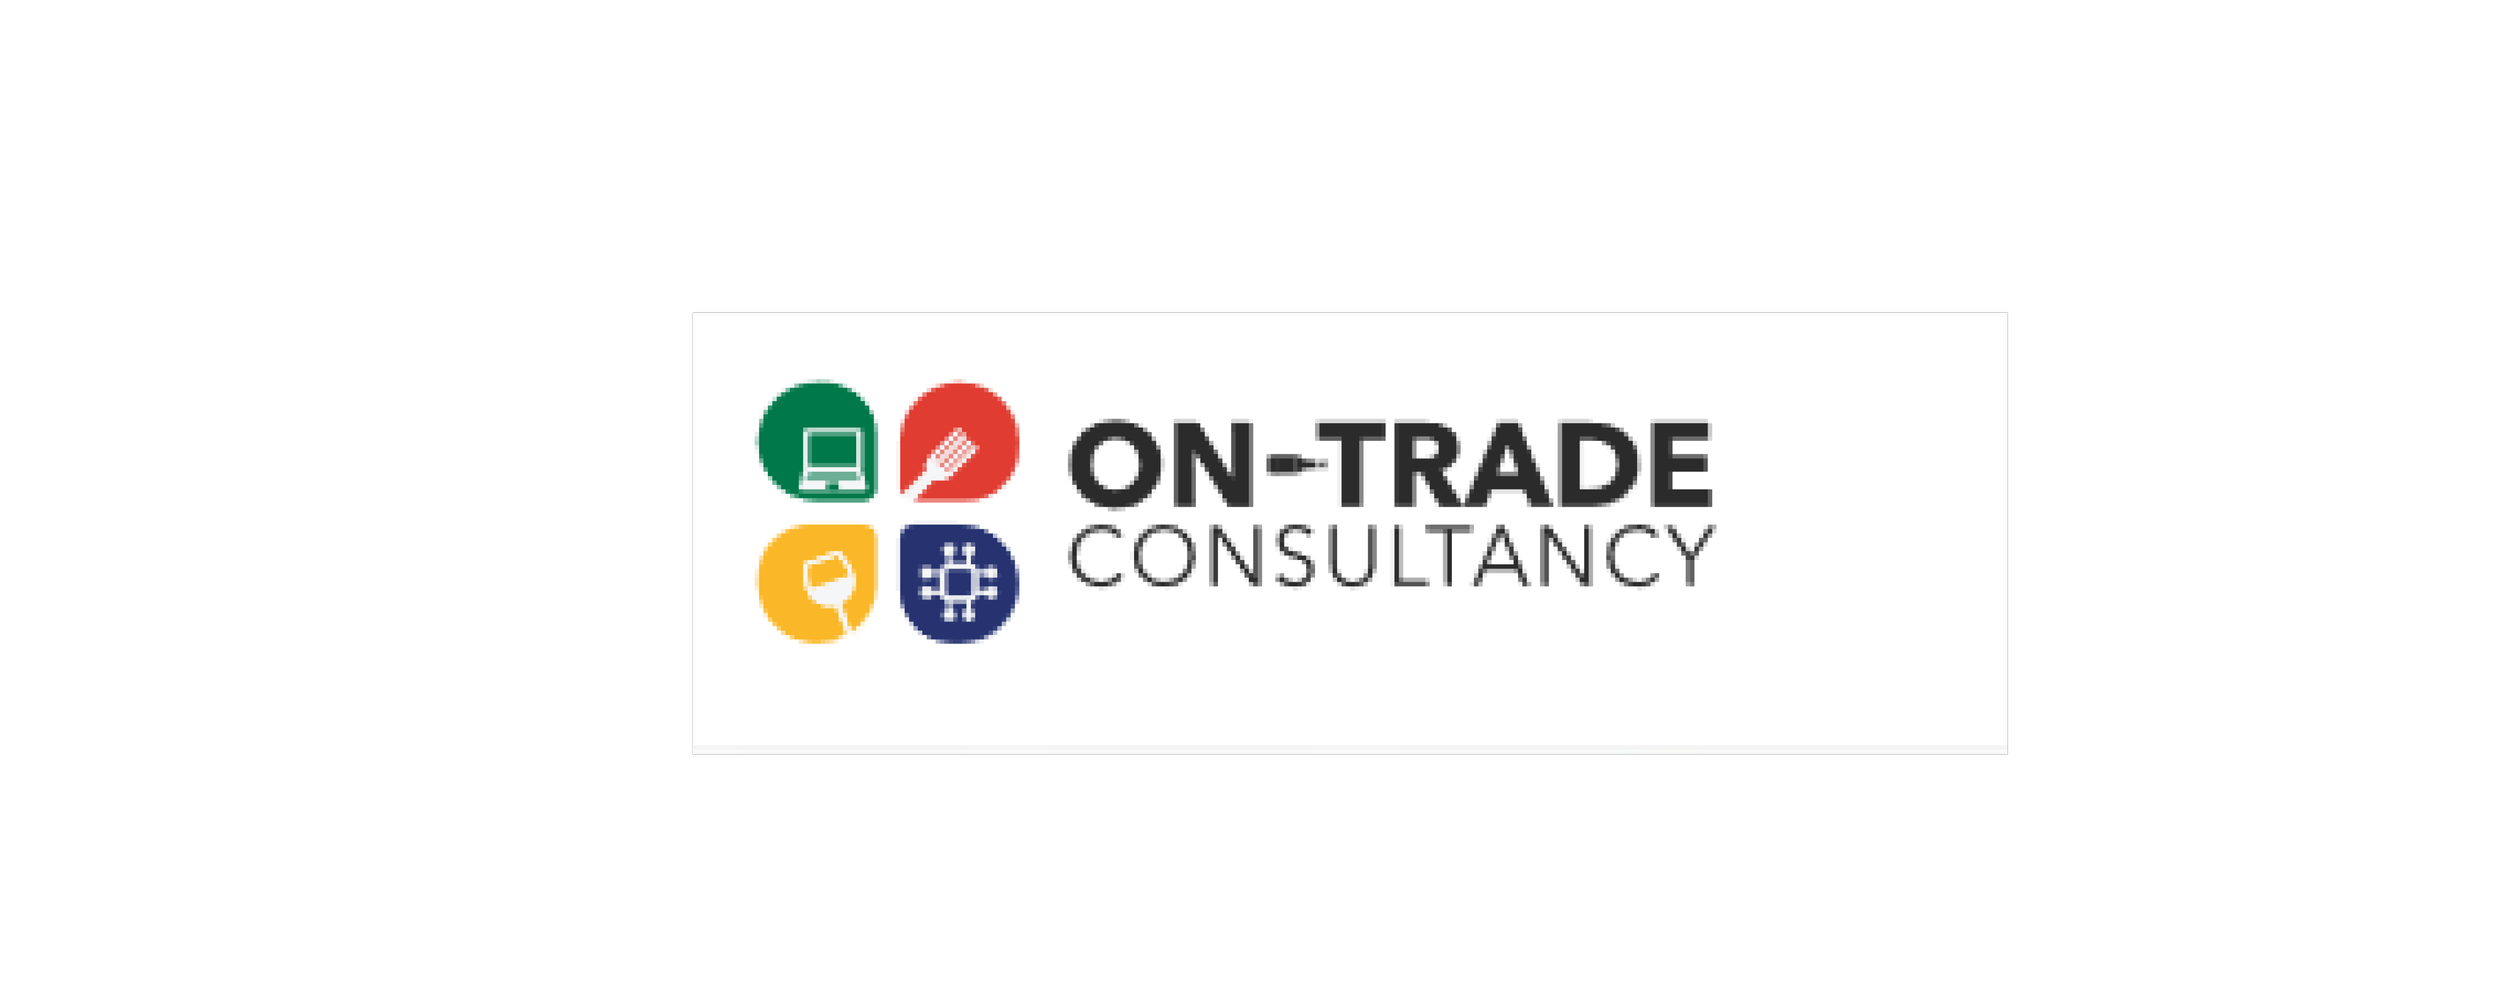 OnTrade Consult - SoS.png